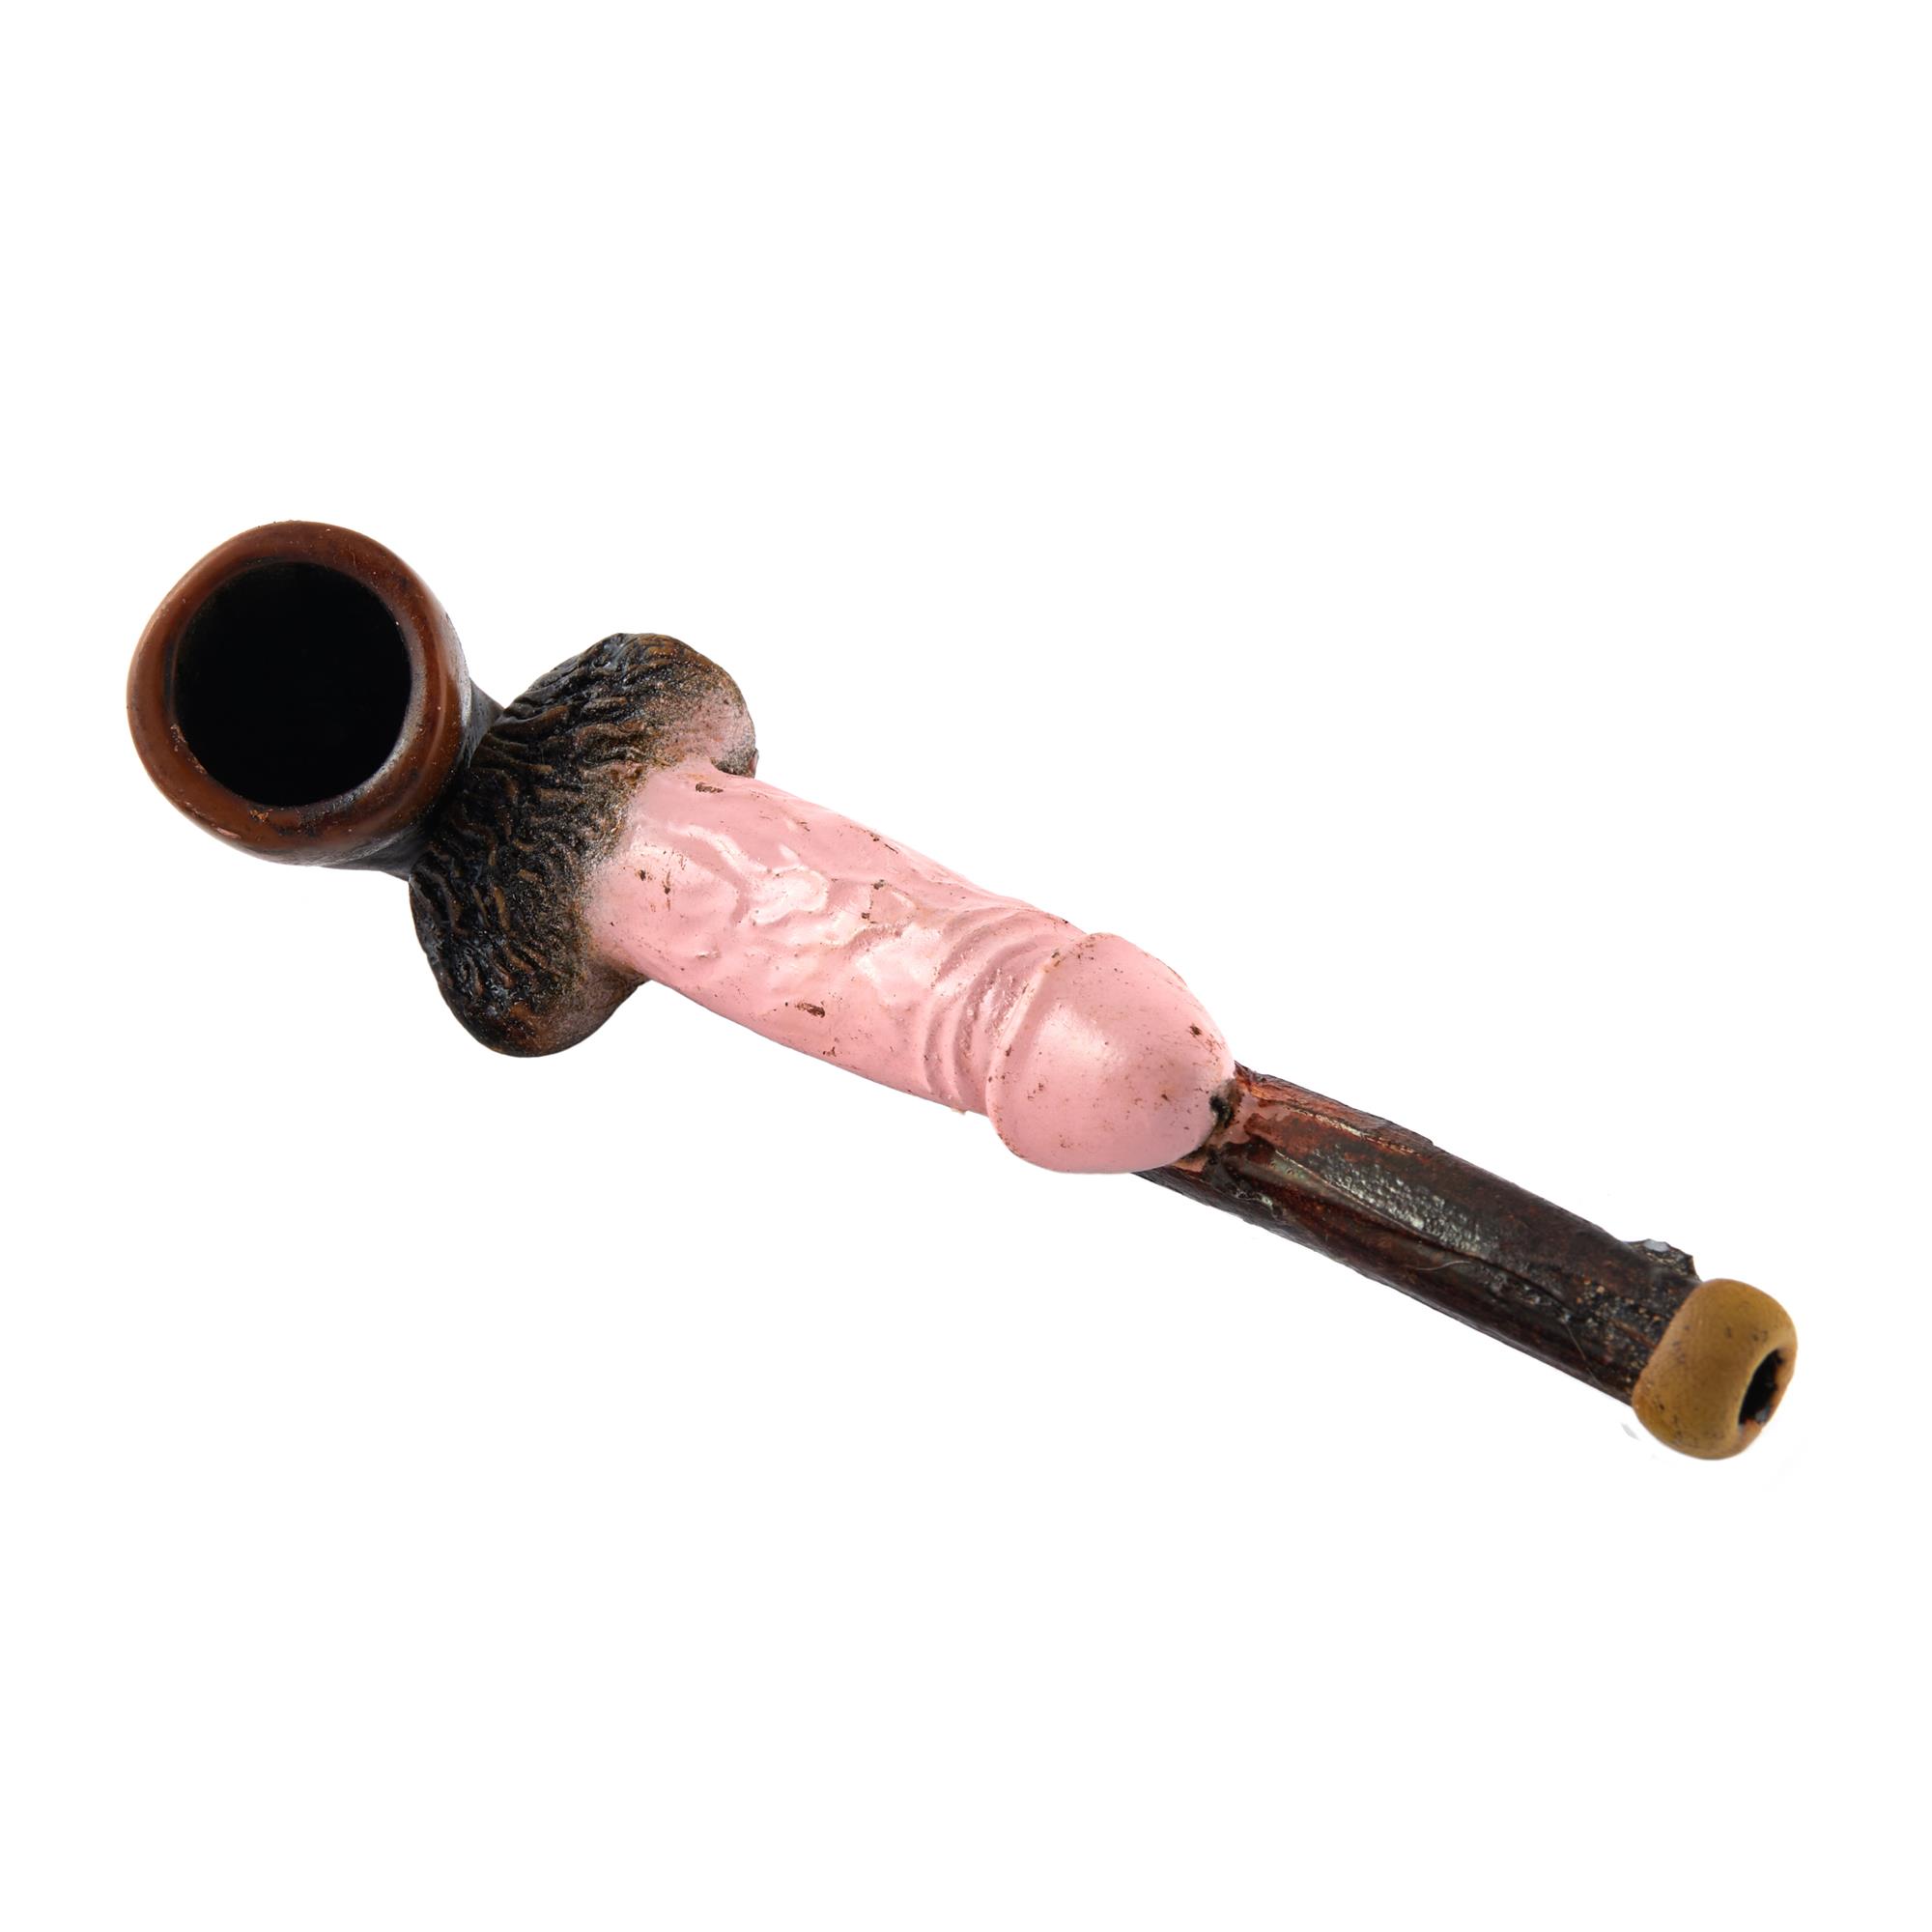 PINK DING DONG PENIS HAND PIPE